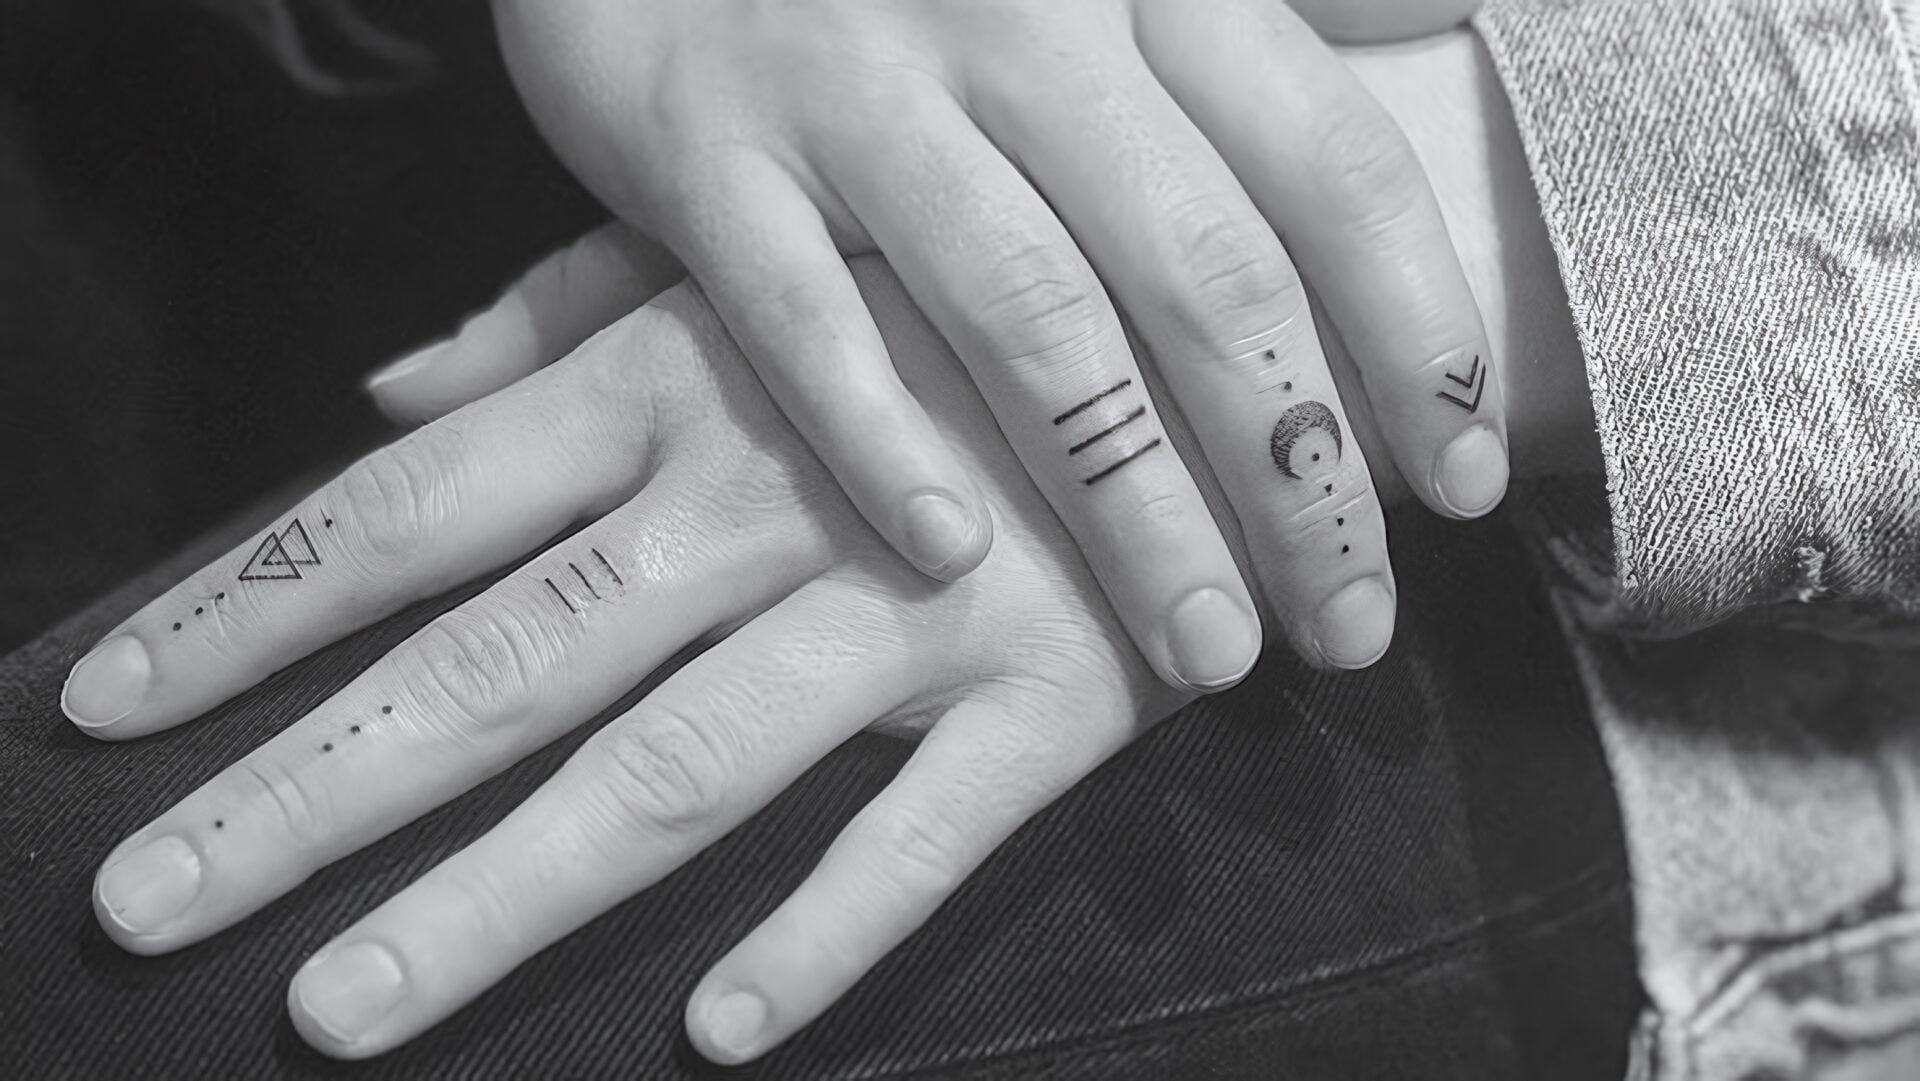 moon finger tattoo meaning